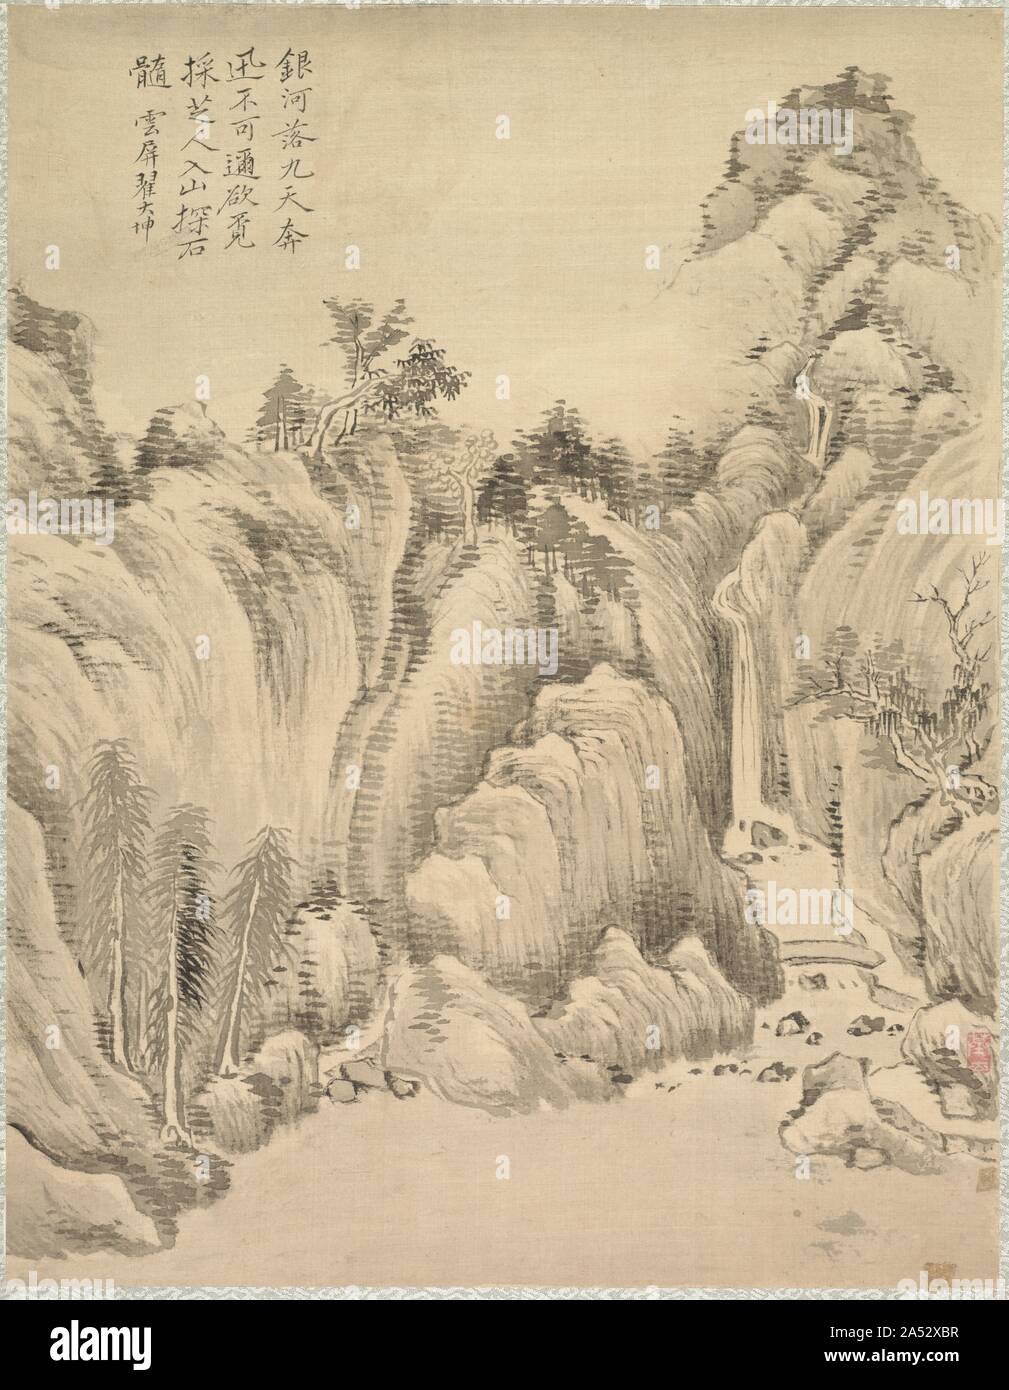 Waterfall and Rocks, 1847. Japanese painters were frequently influenced by paintings from China and Korea that they saw in private and temple collections throughout the country. Japan has a long history of interest in its continental neighbors. Stock Photo